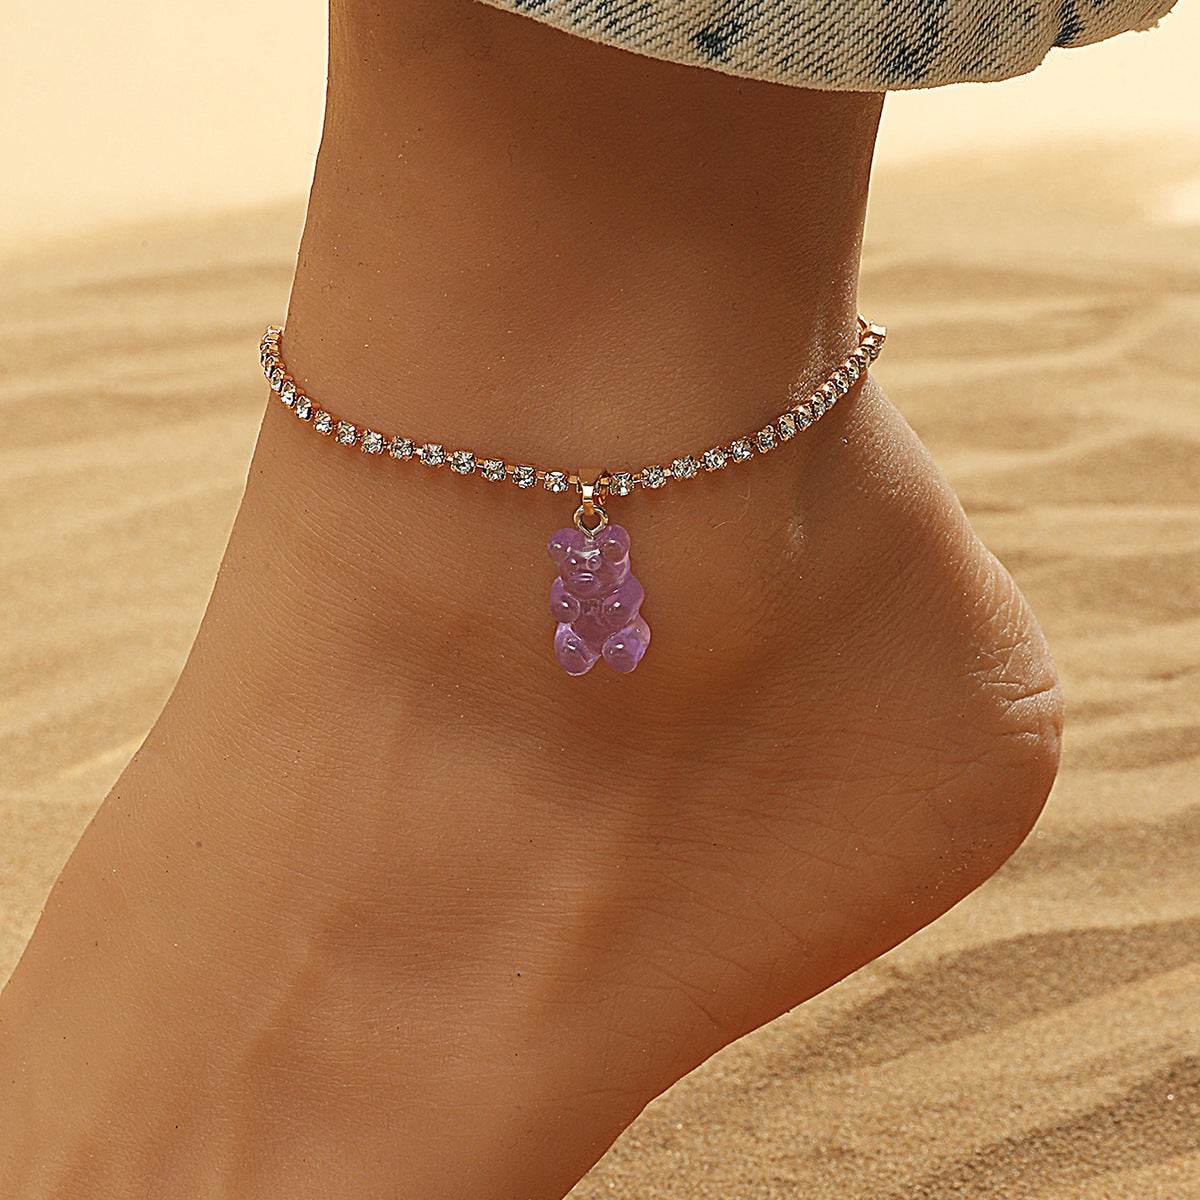 Fashionable exquisite diamond chain design with creative bear pendant anklet